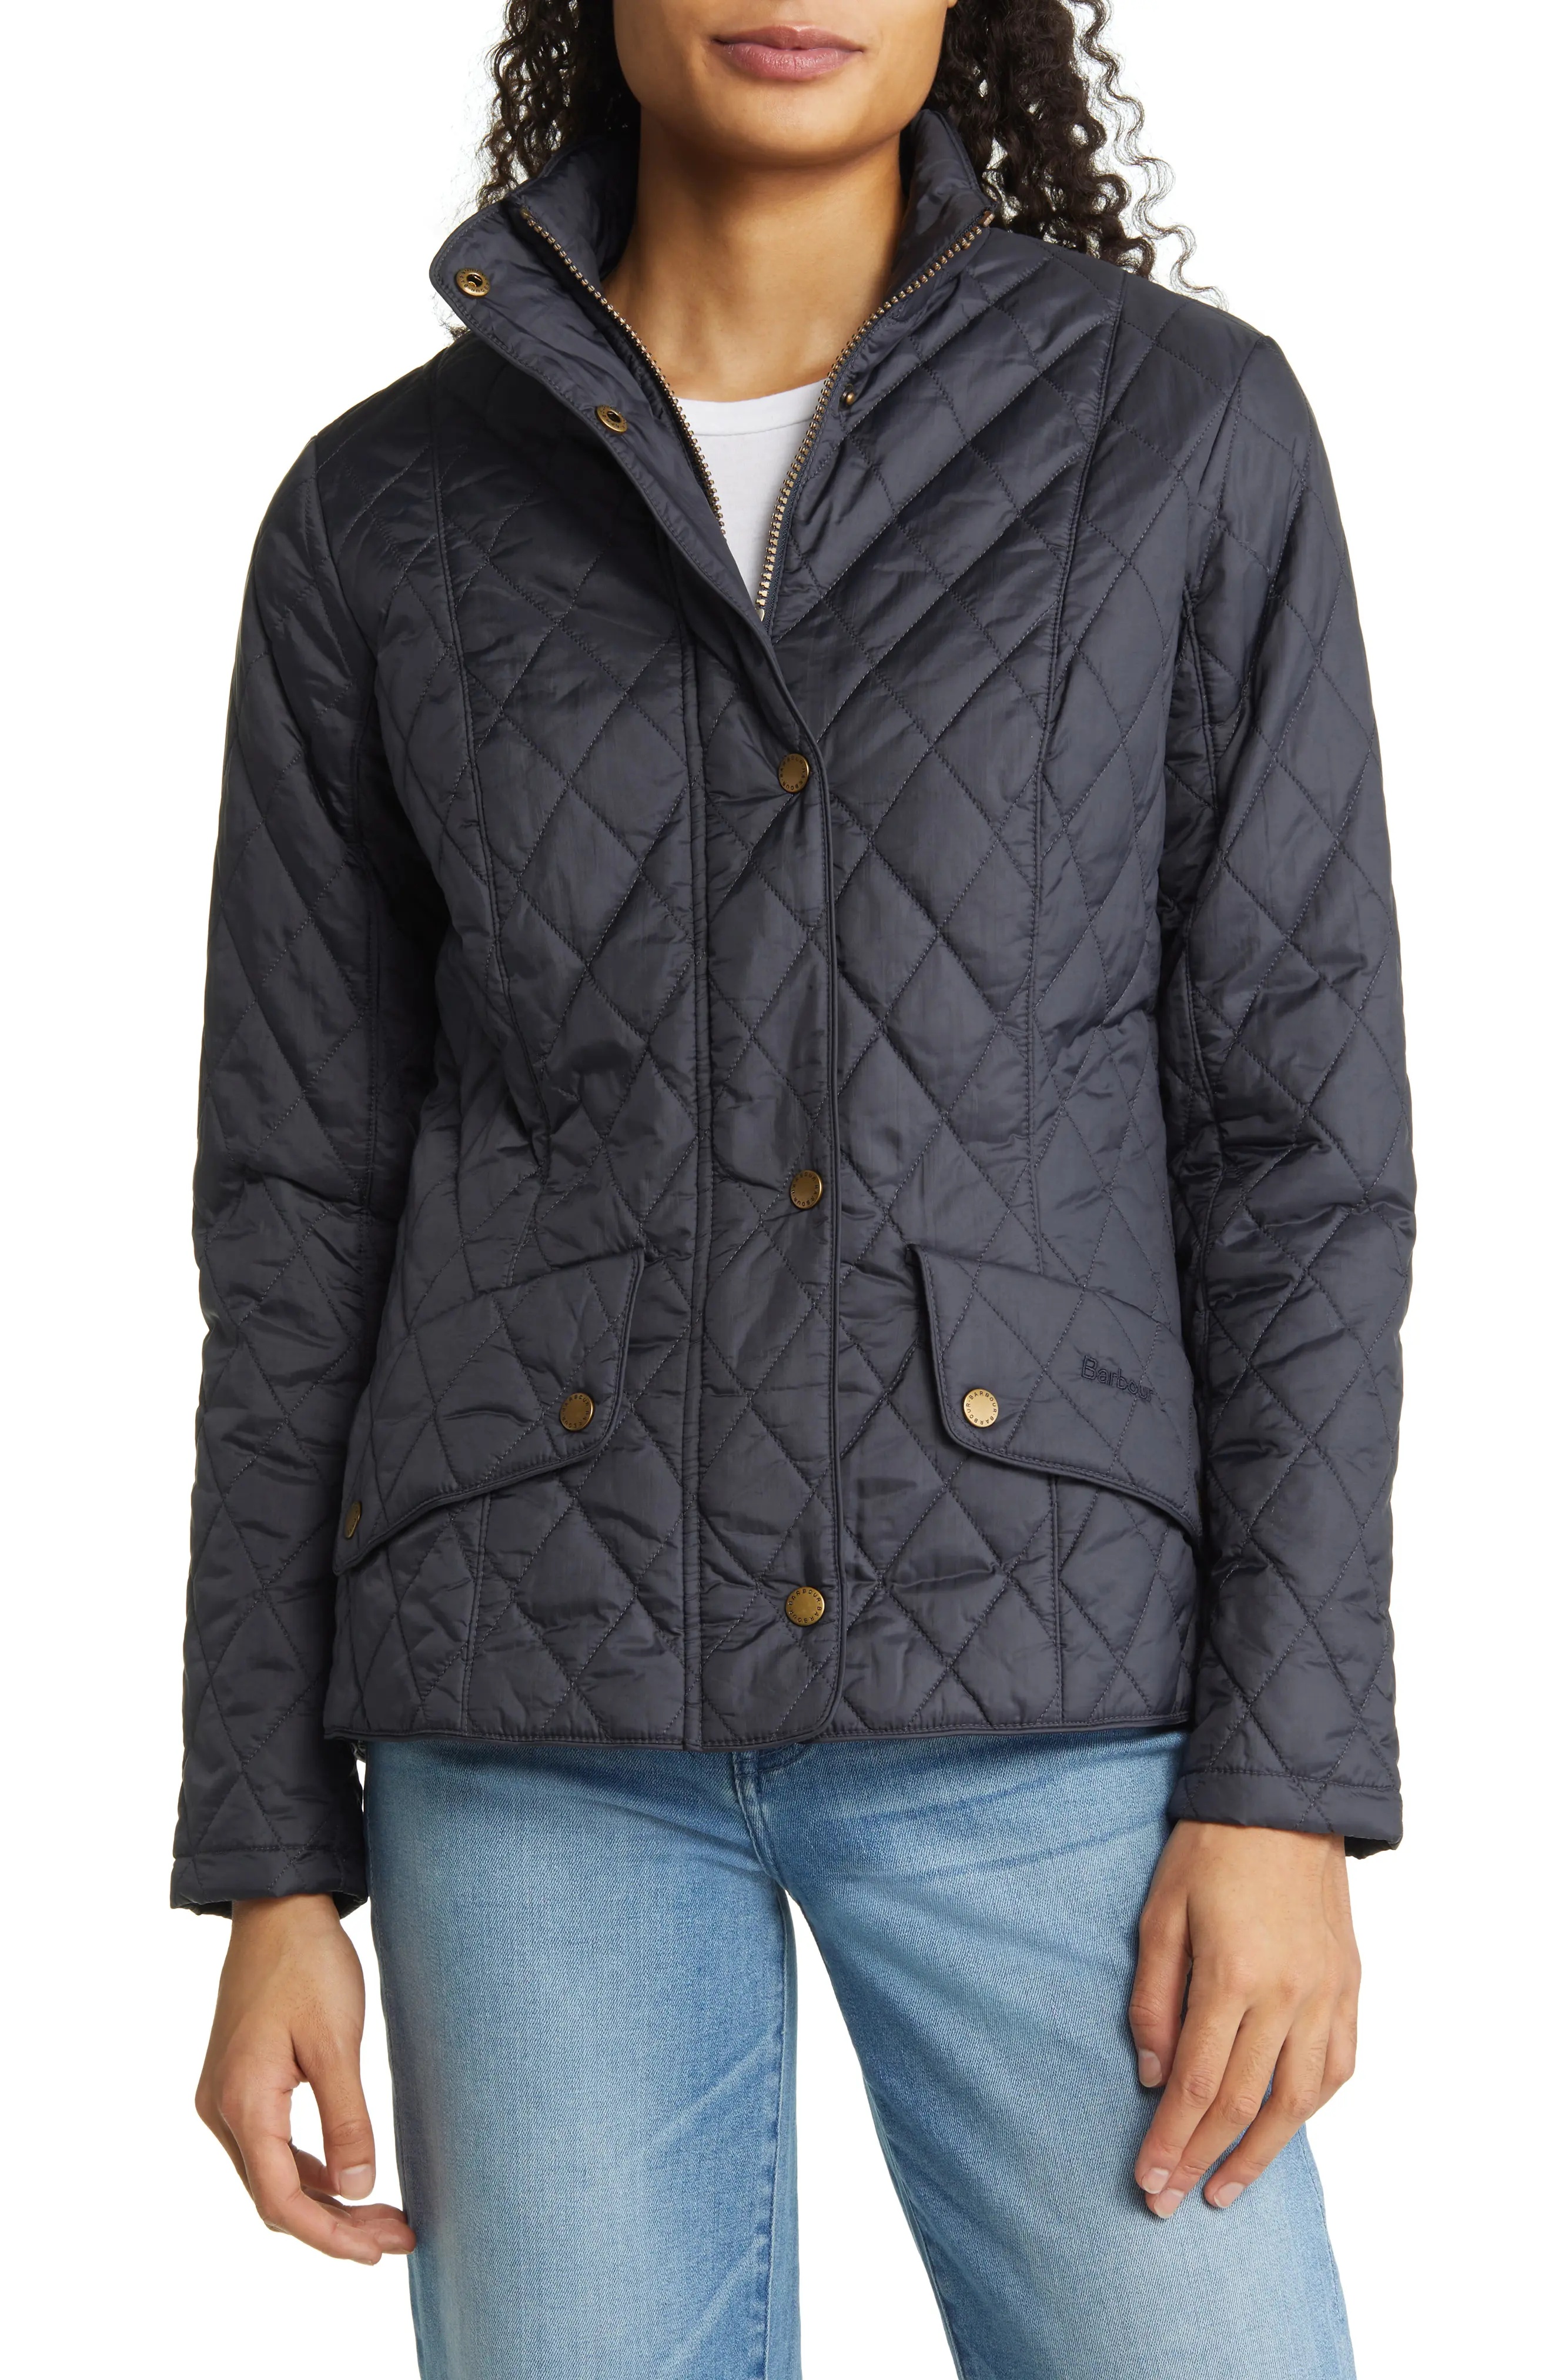 Flyweight Quilted Jacket - 4